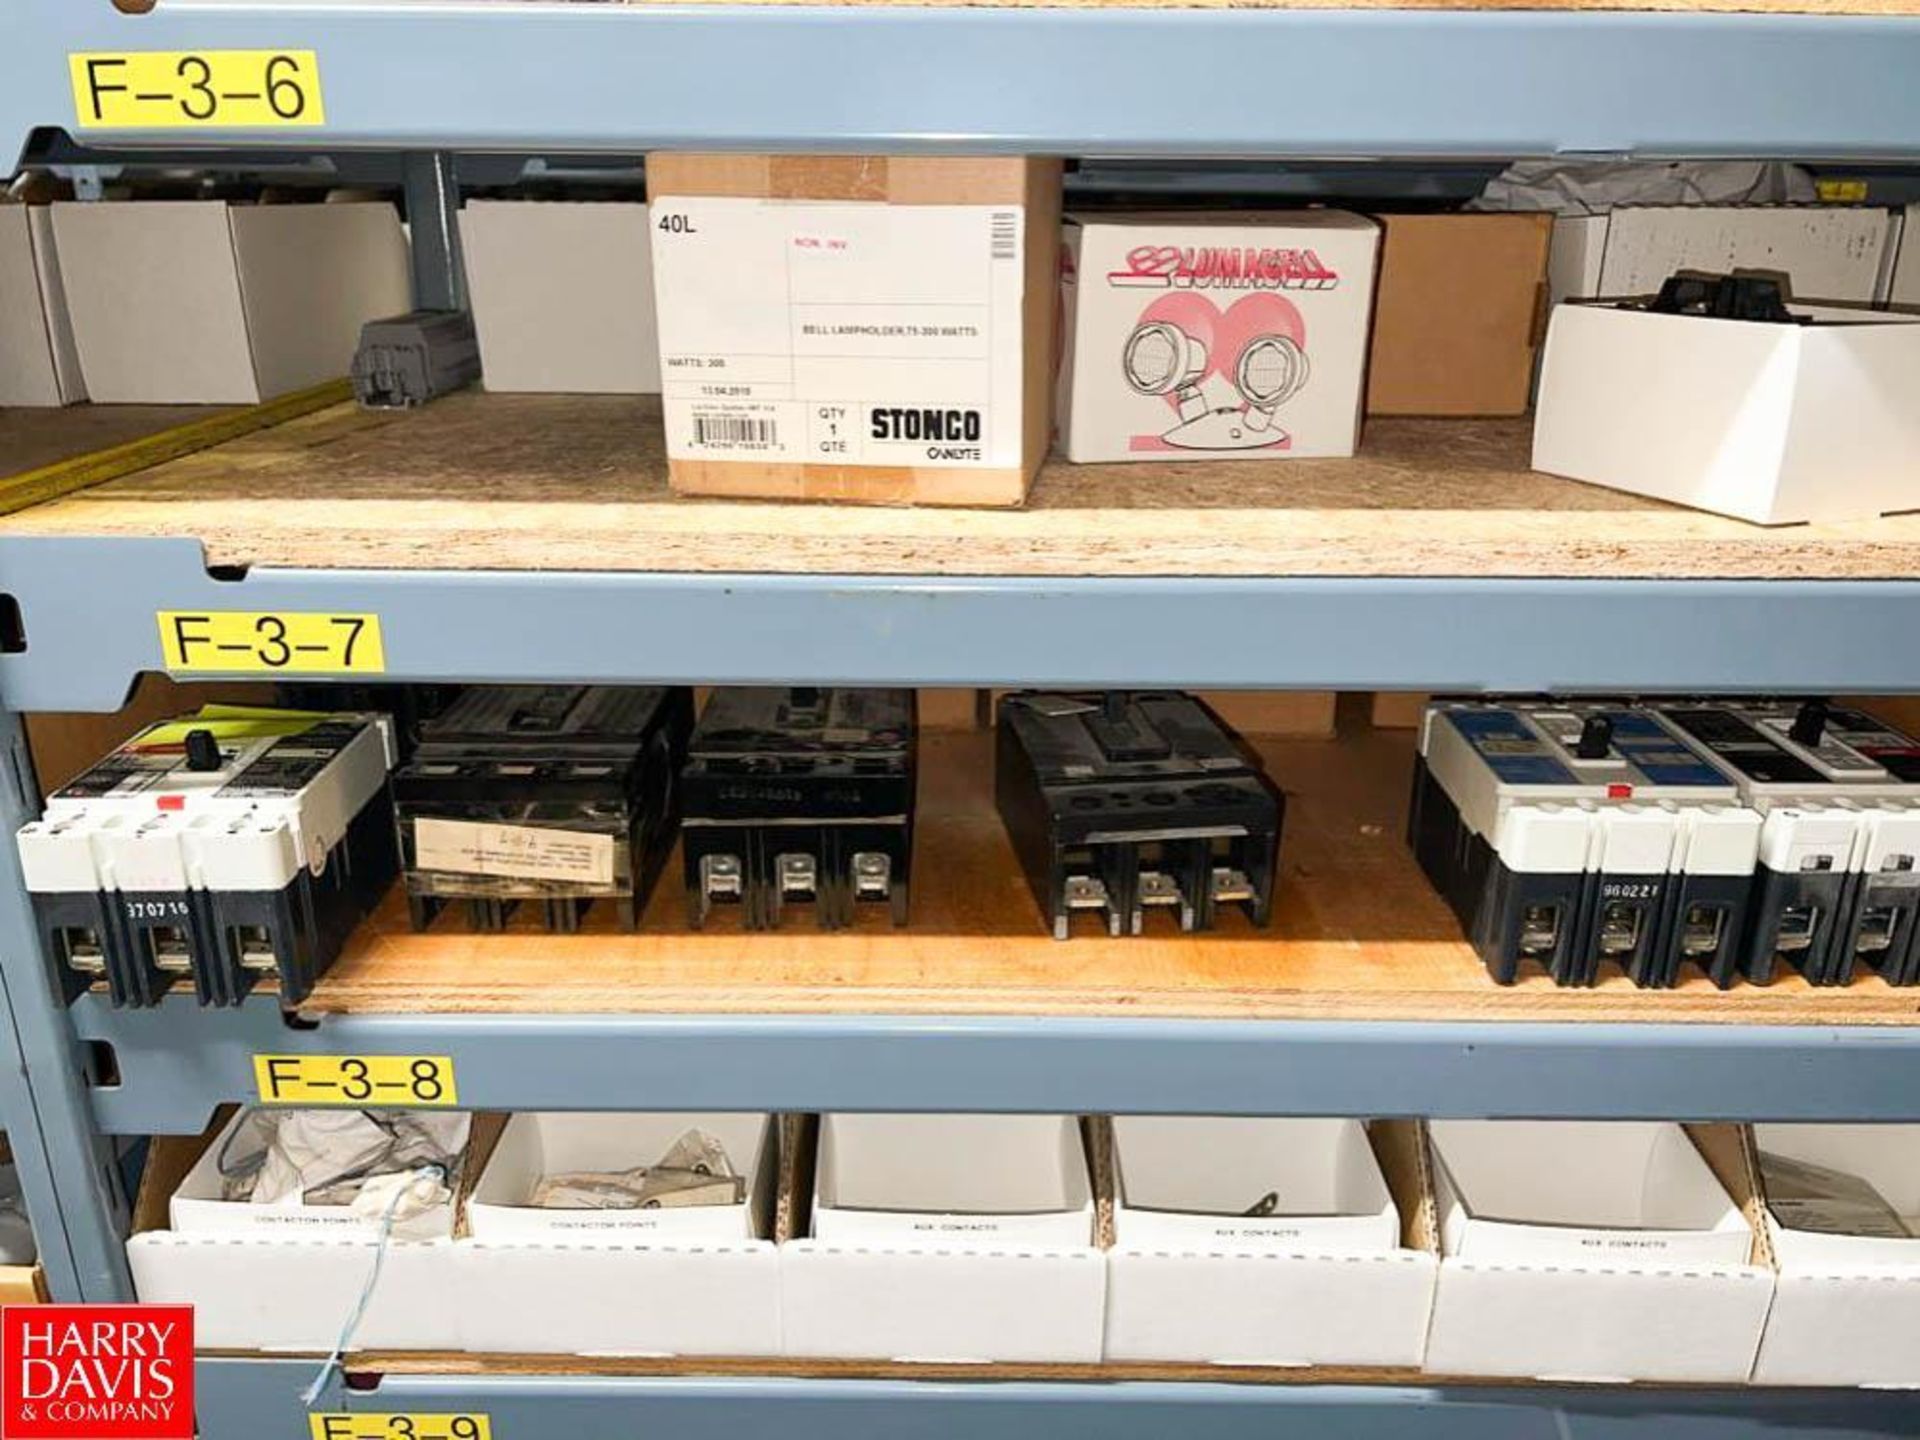 Assorted Electrical Equipment, Including: Circuit Breakers, Conduit, Conduit Adapters and Enclosures - Image 15 of 46